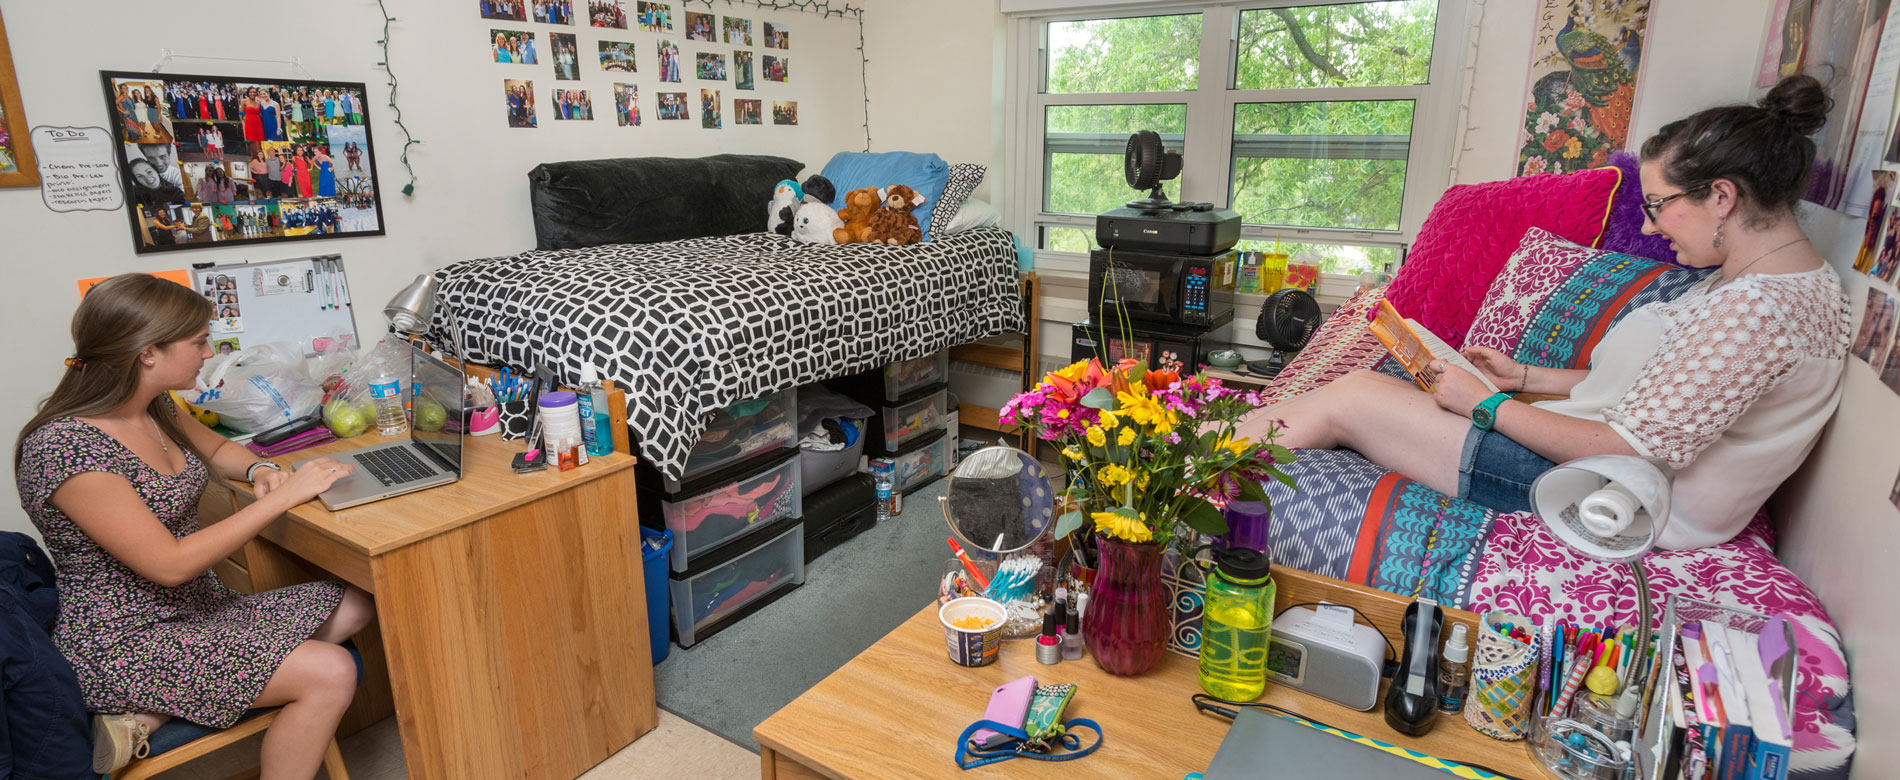 Students studying in a decorated residence hall room